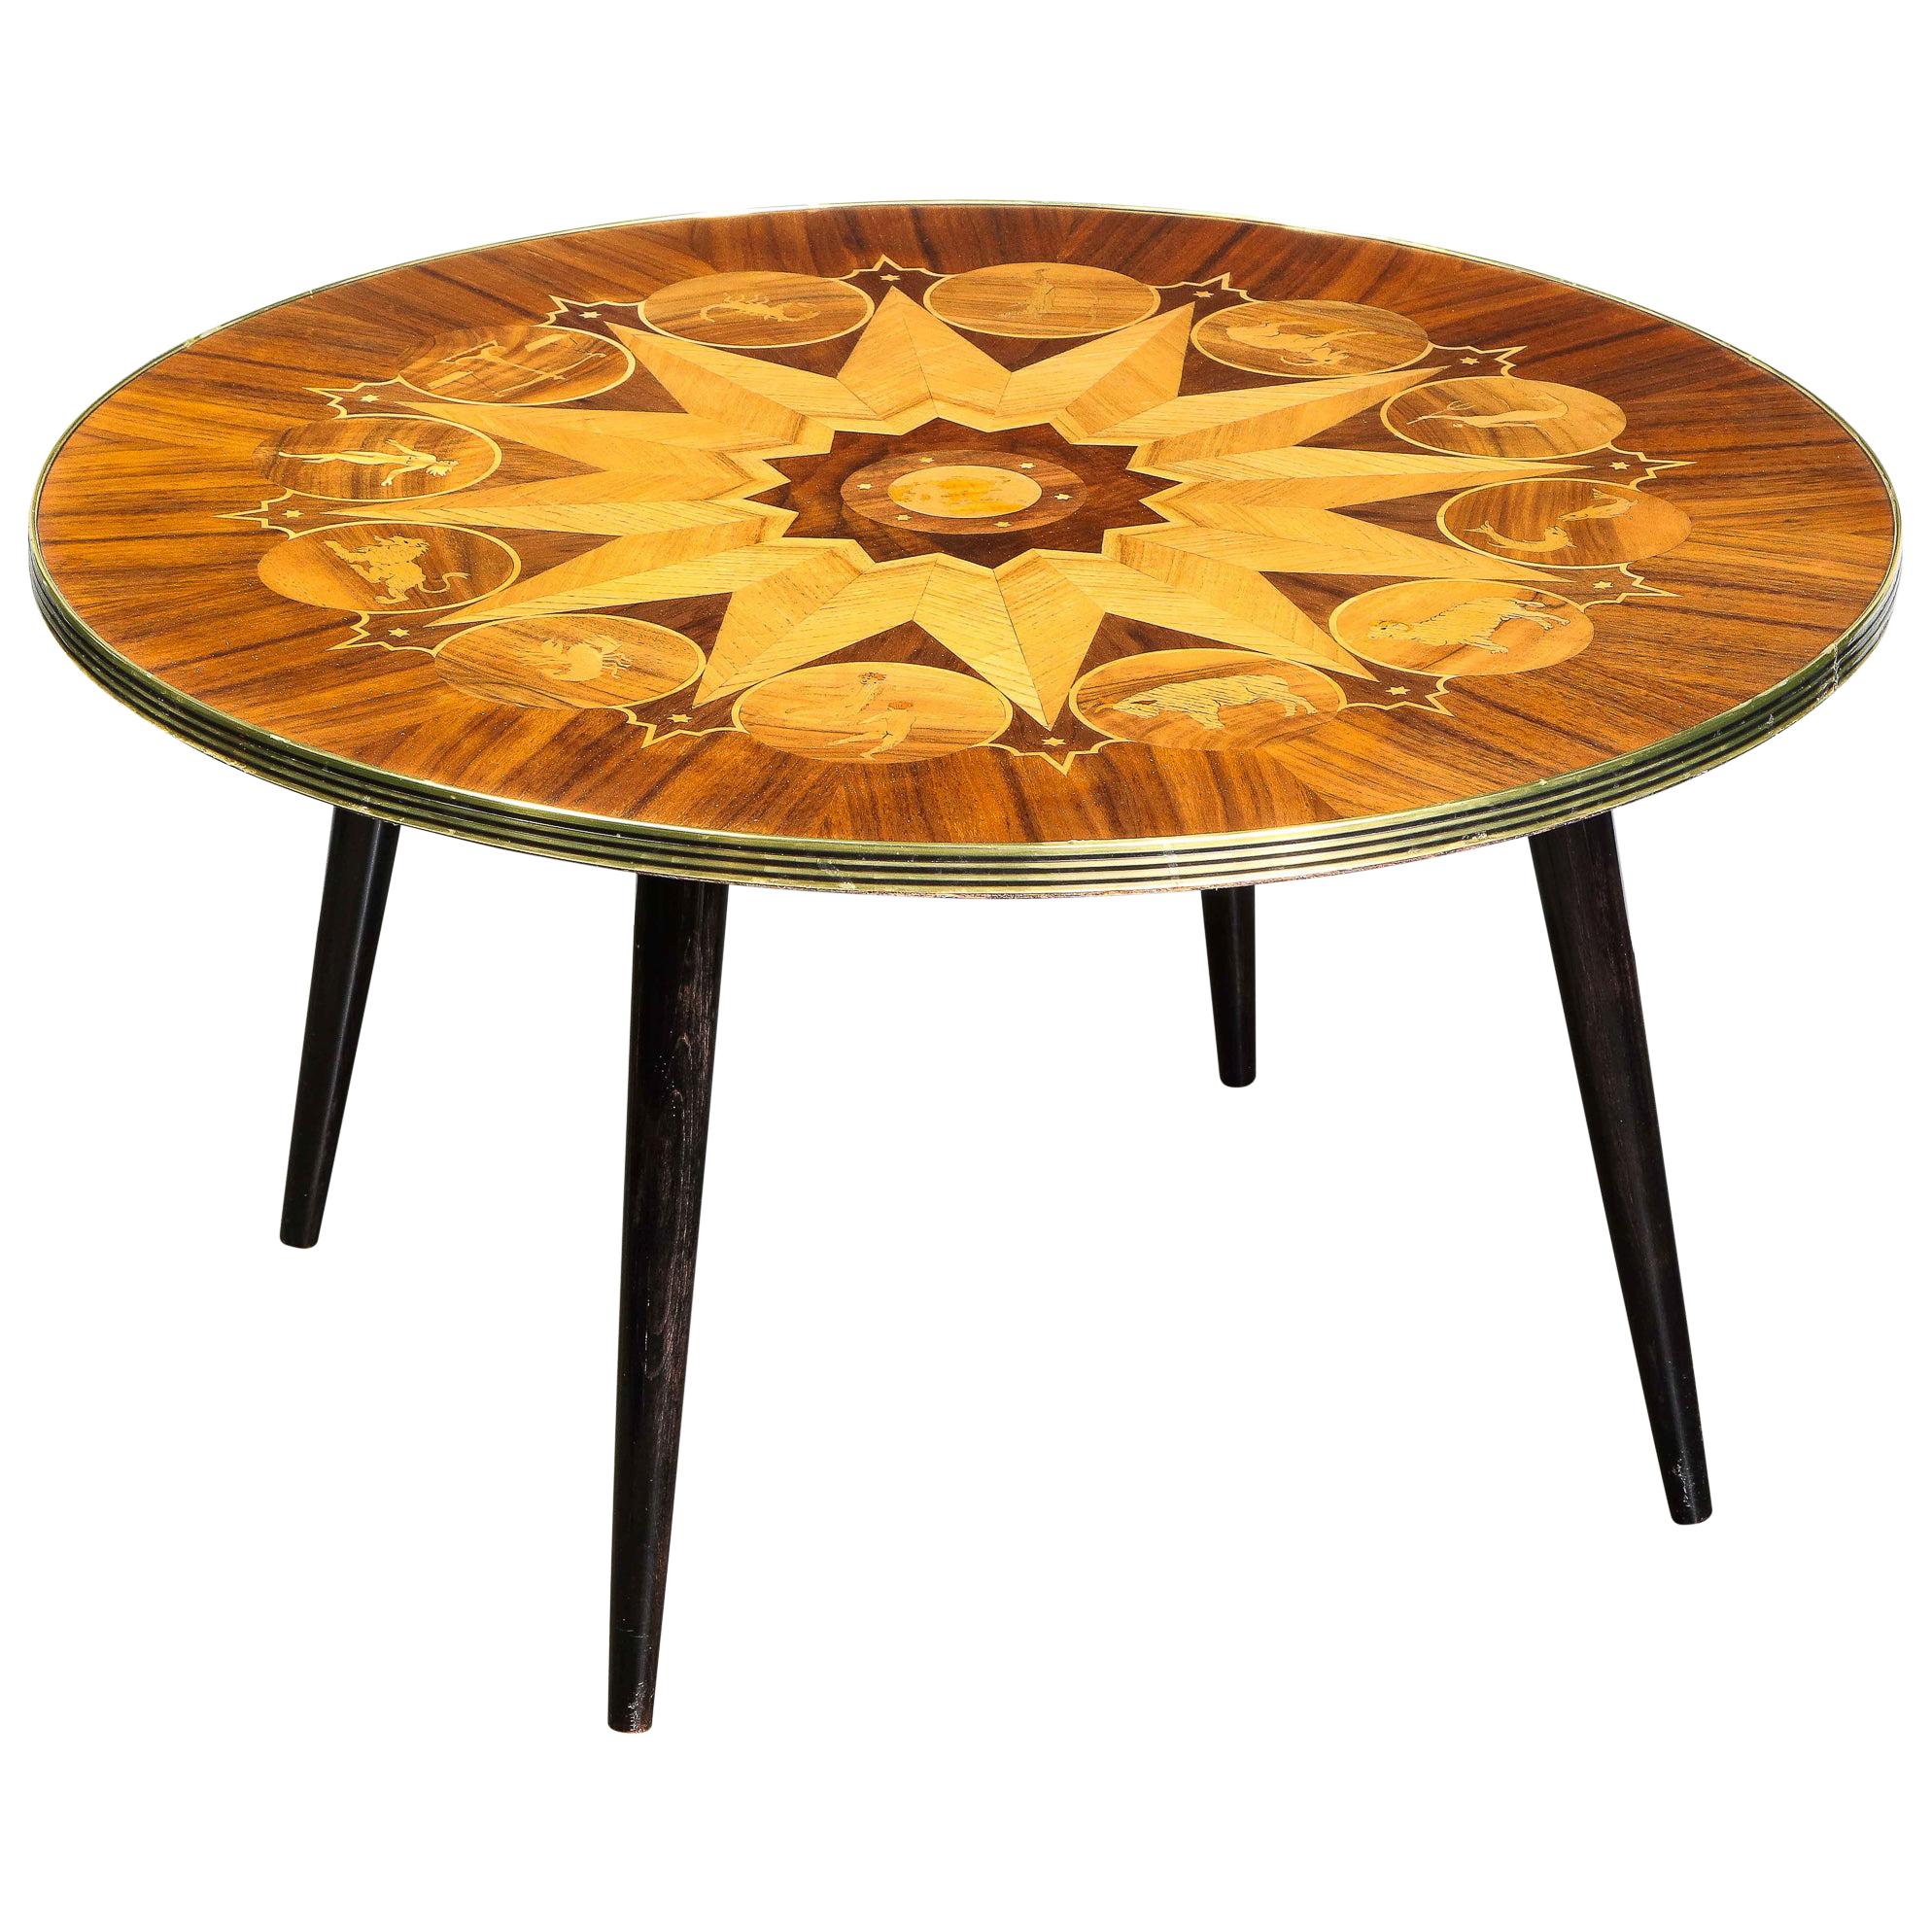 Midcentury Bookmatched Walnut & Elm Cocktail Table with Zodiac Themed Marquetry